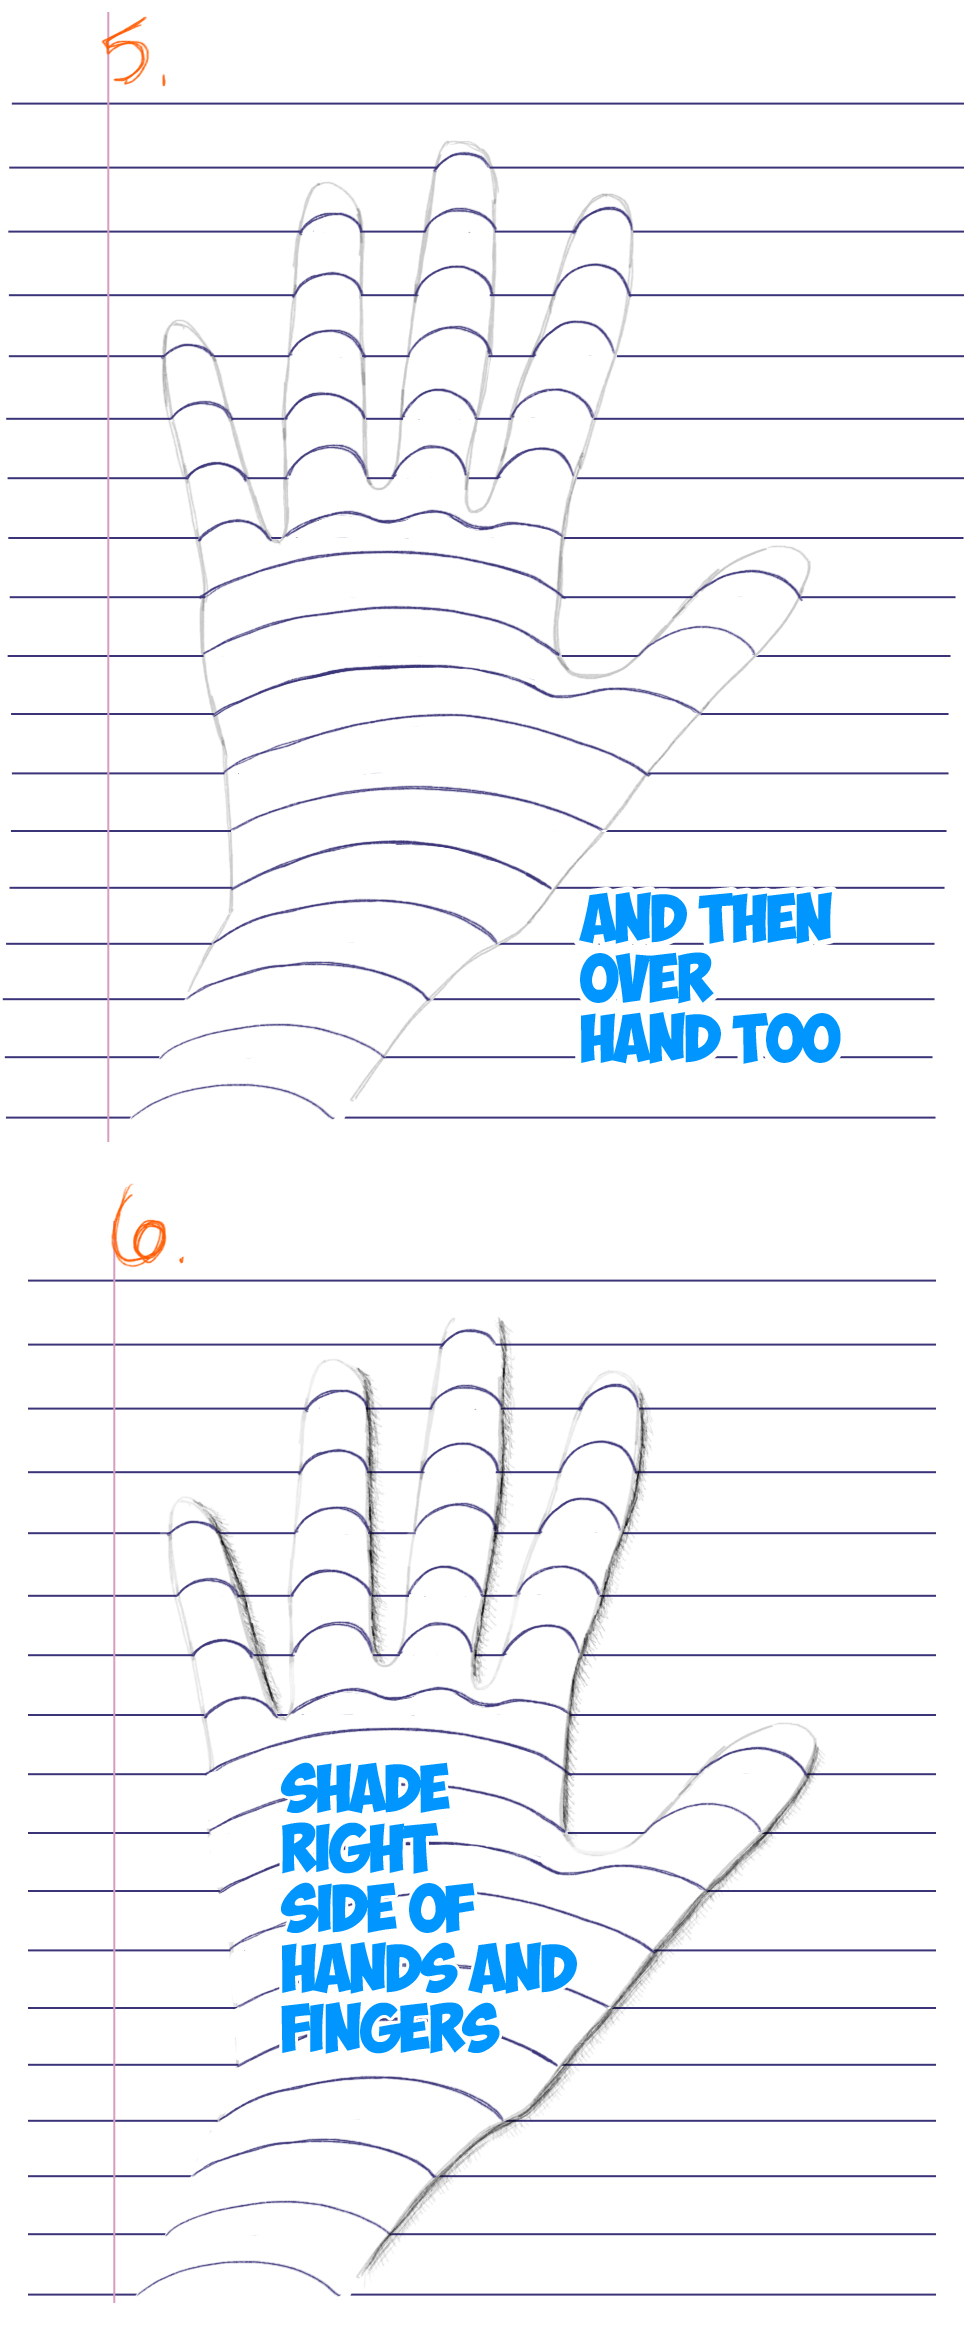 drawing 3-dimensional hands on notebook paper - step by step drawing tutorial